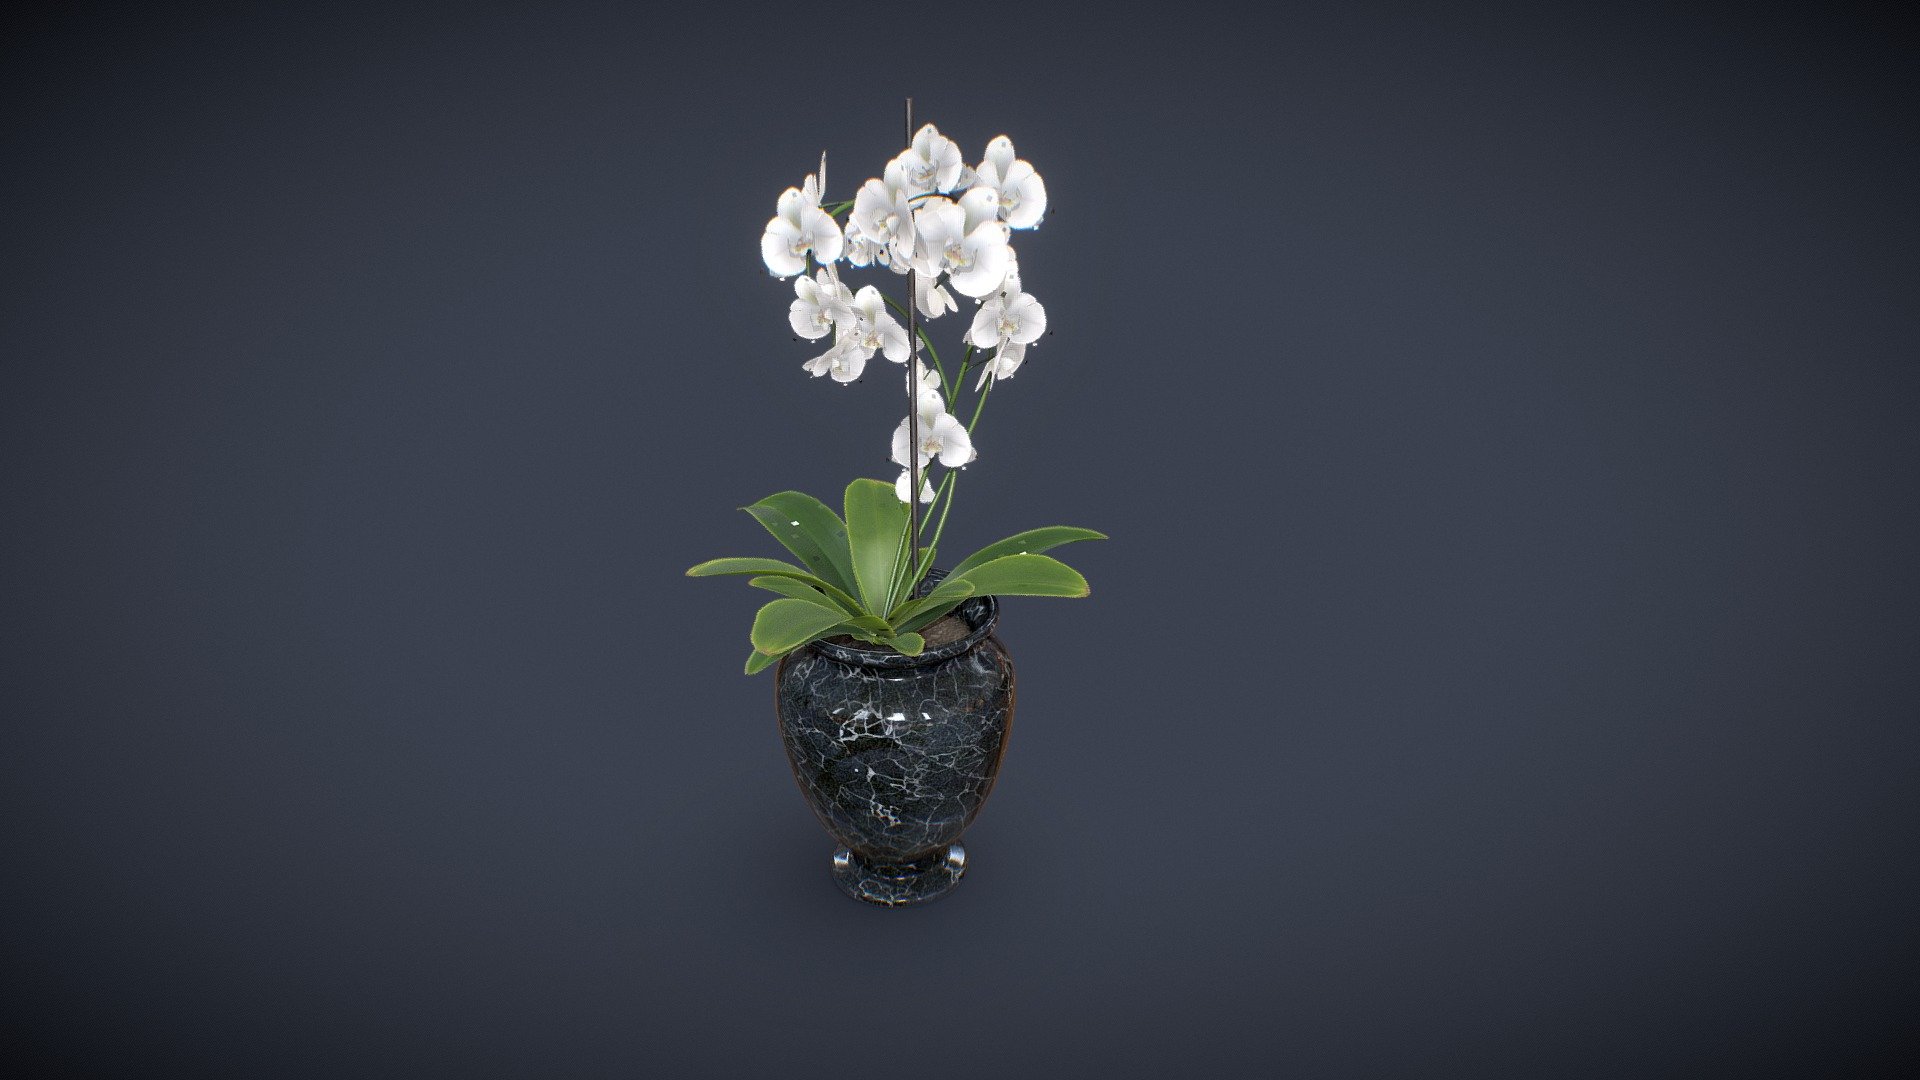 Hi everyone ! This is a small vase props made for a personal 3D project of a victorian scenary. The potted orchid plant will go over a large desk.

Made with Maya, PS and Substance.

You will find in the package Scene file, FBX and 2k Textures. 
If you have any customs need, please feel free to contact me 3d model